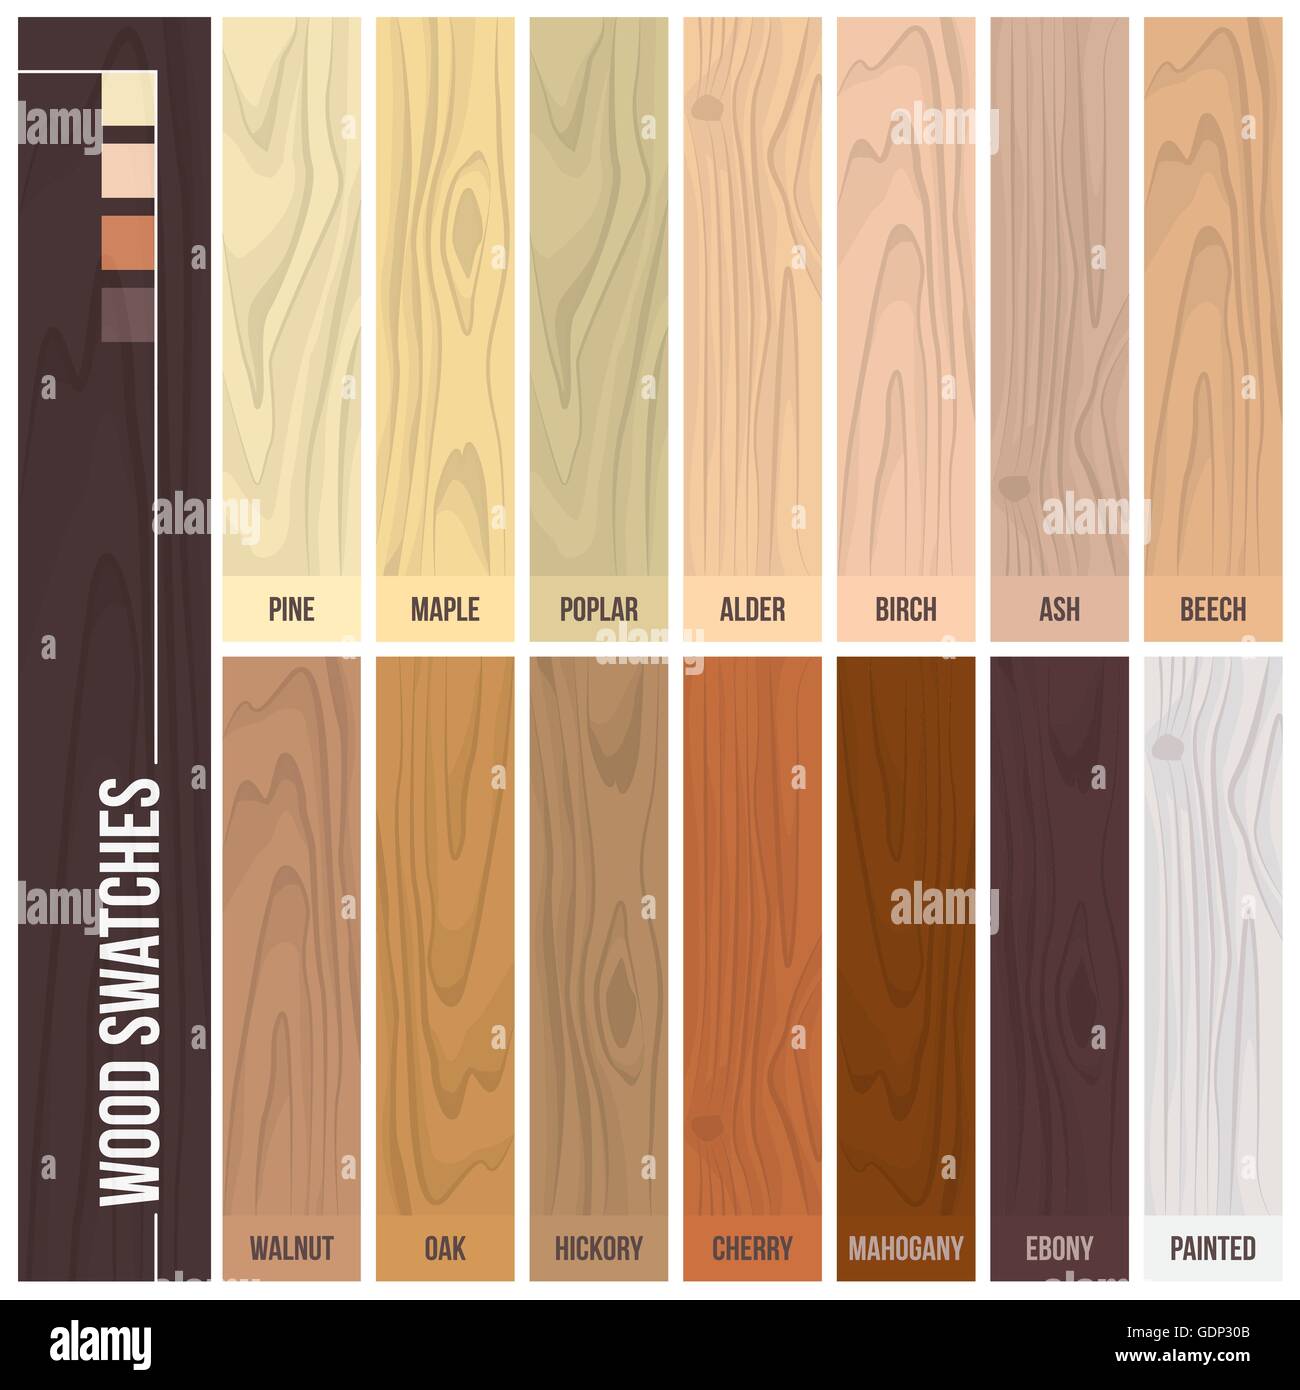 Wood swatches color set with different plants and hues Stock Vector